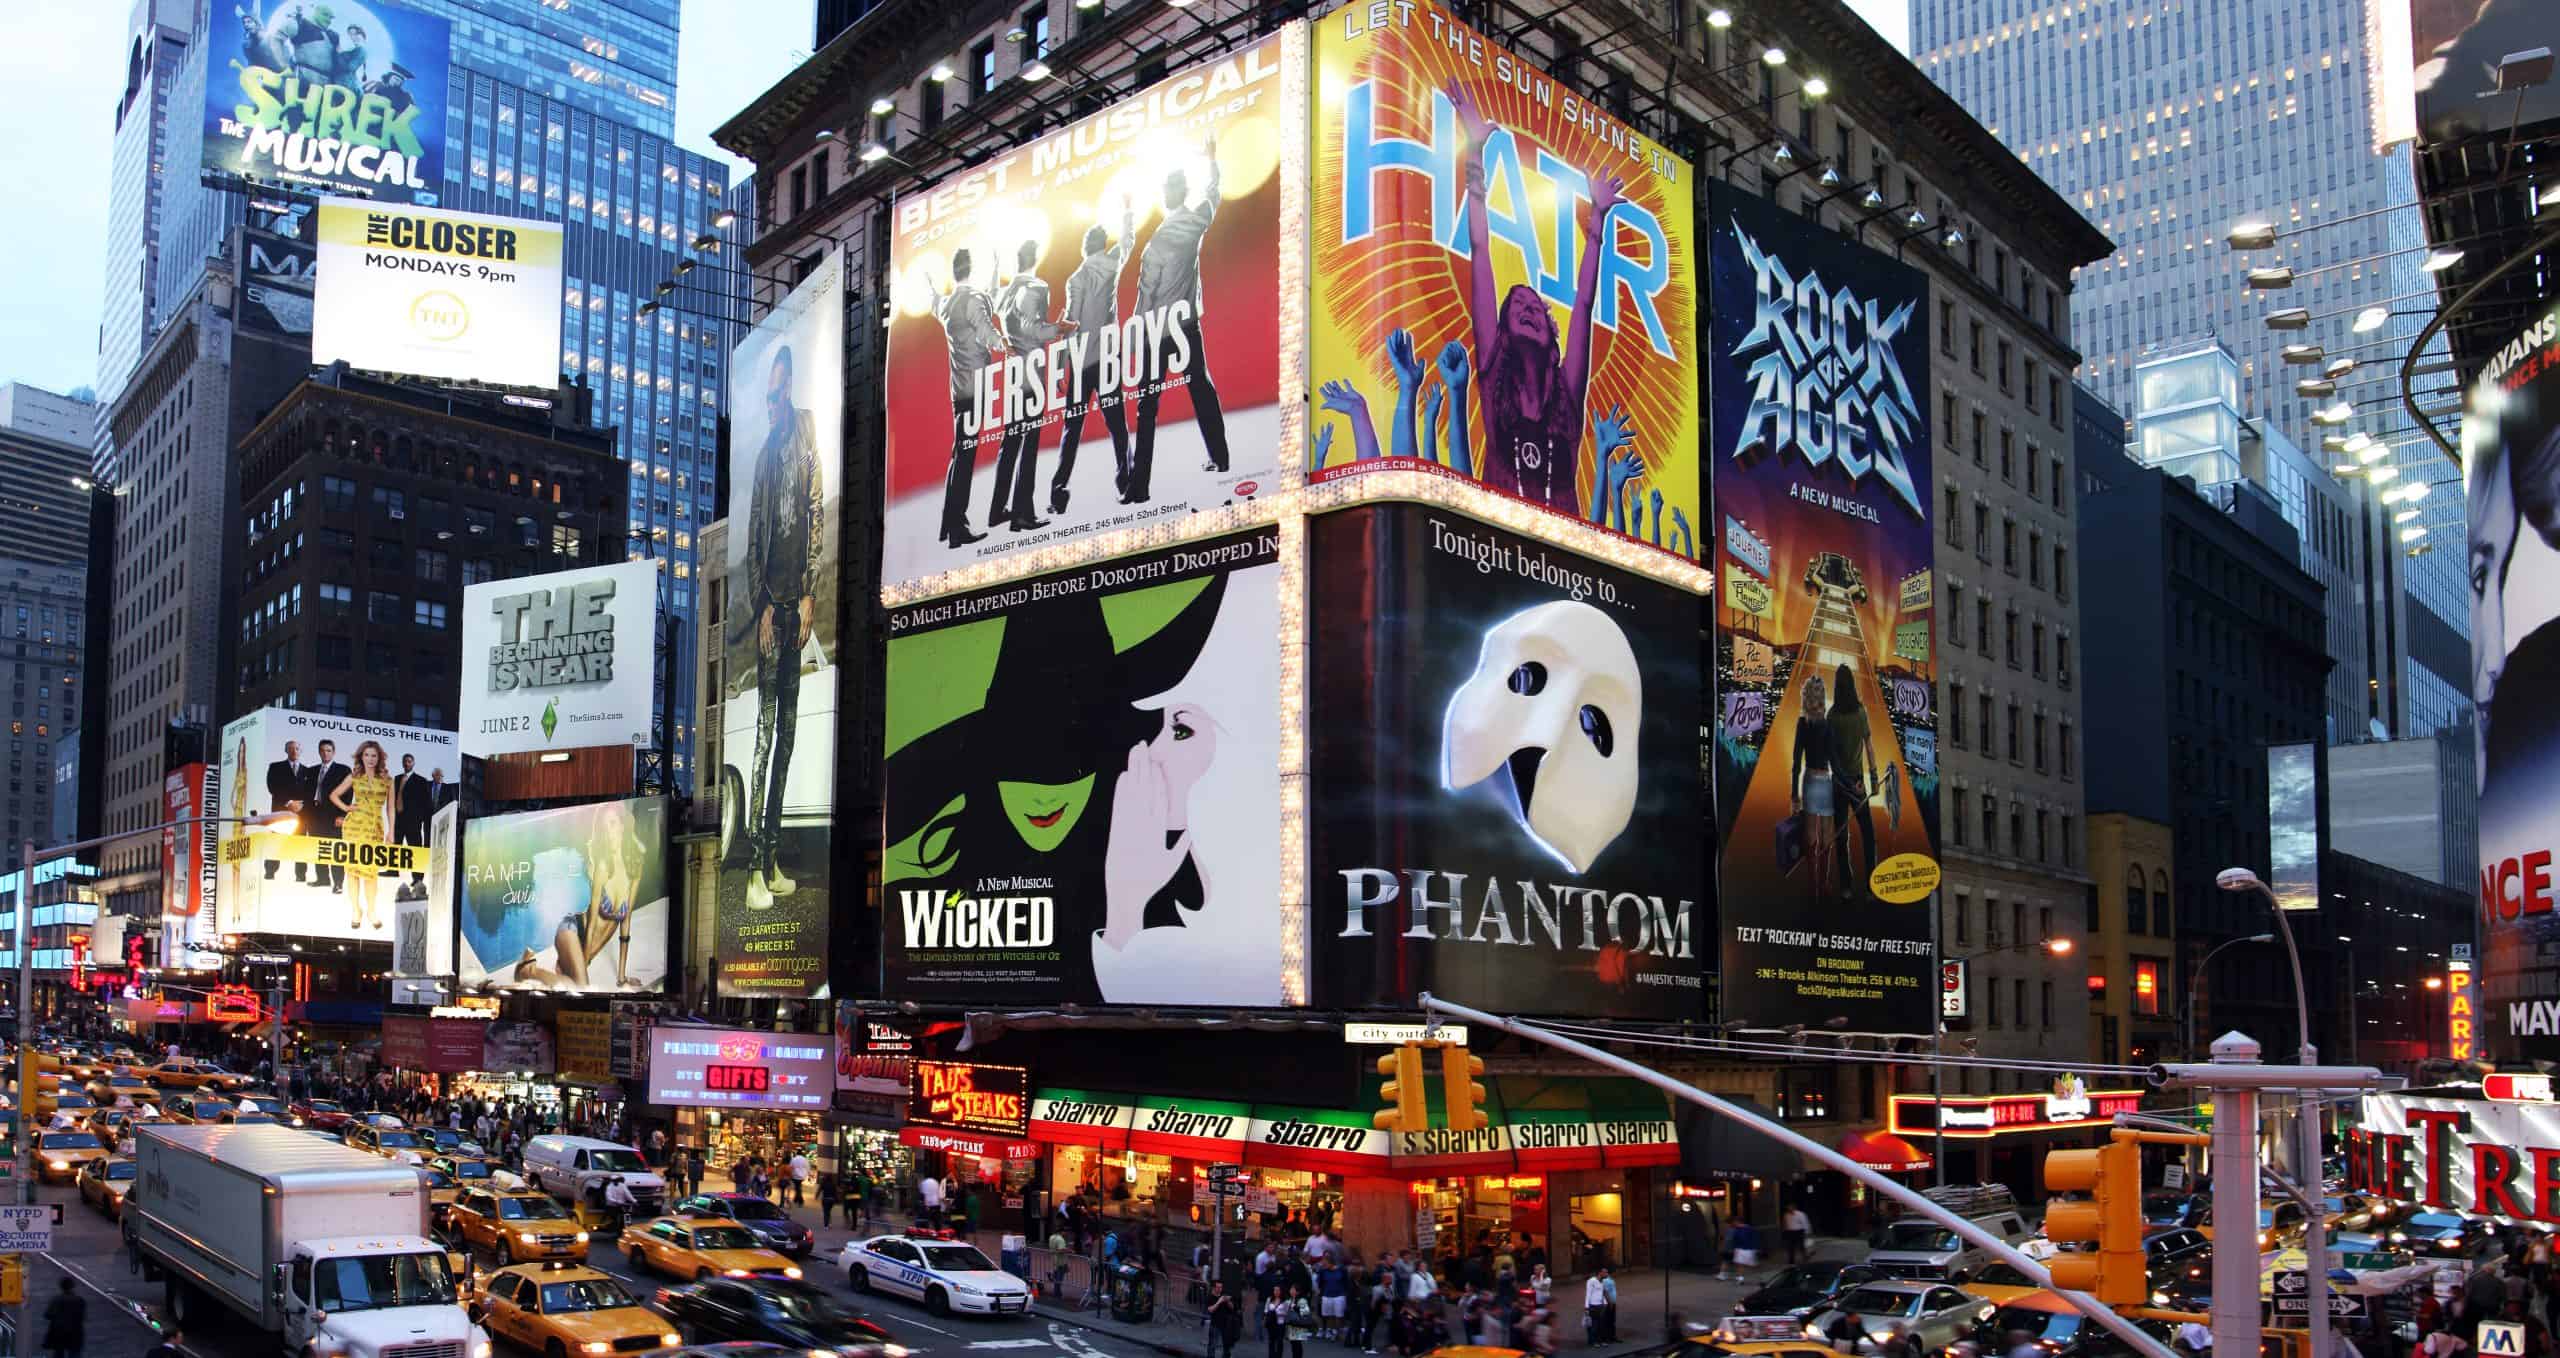 Times Square filled with billboards for Broadway shows.